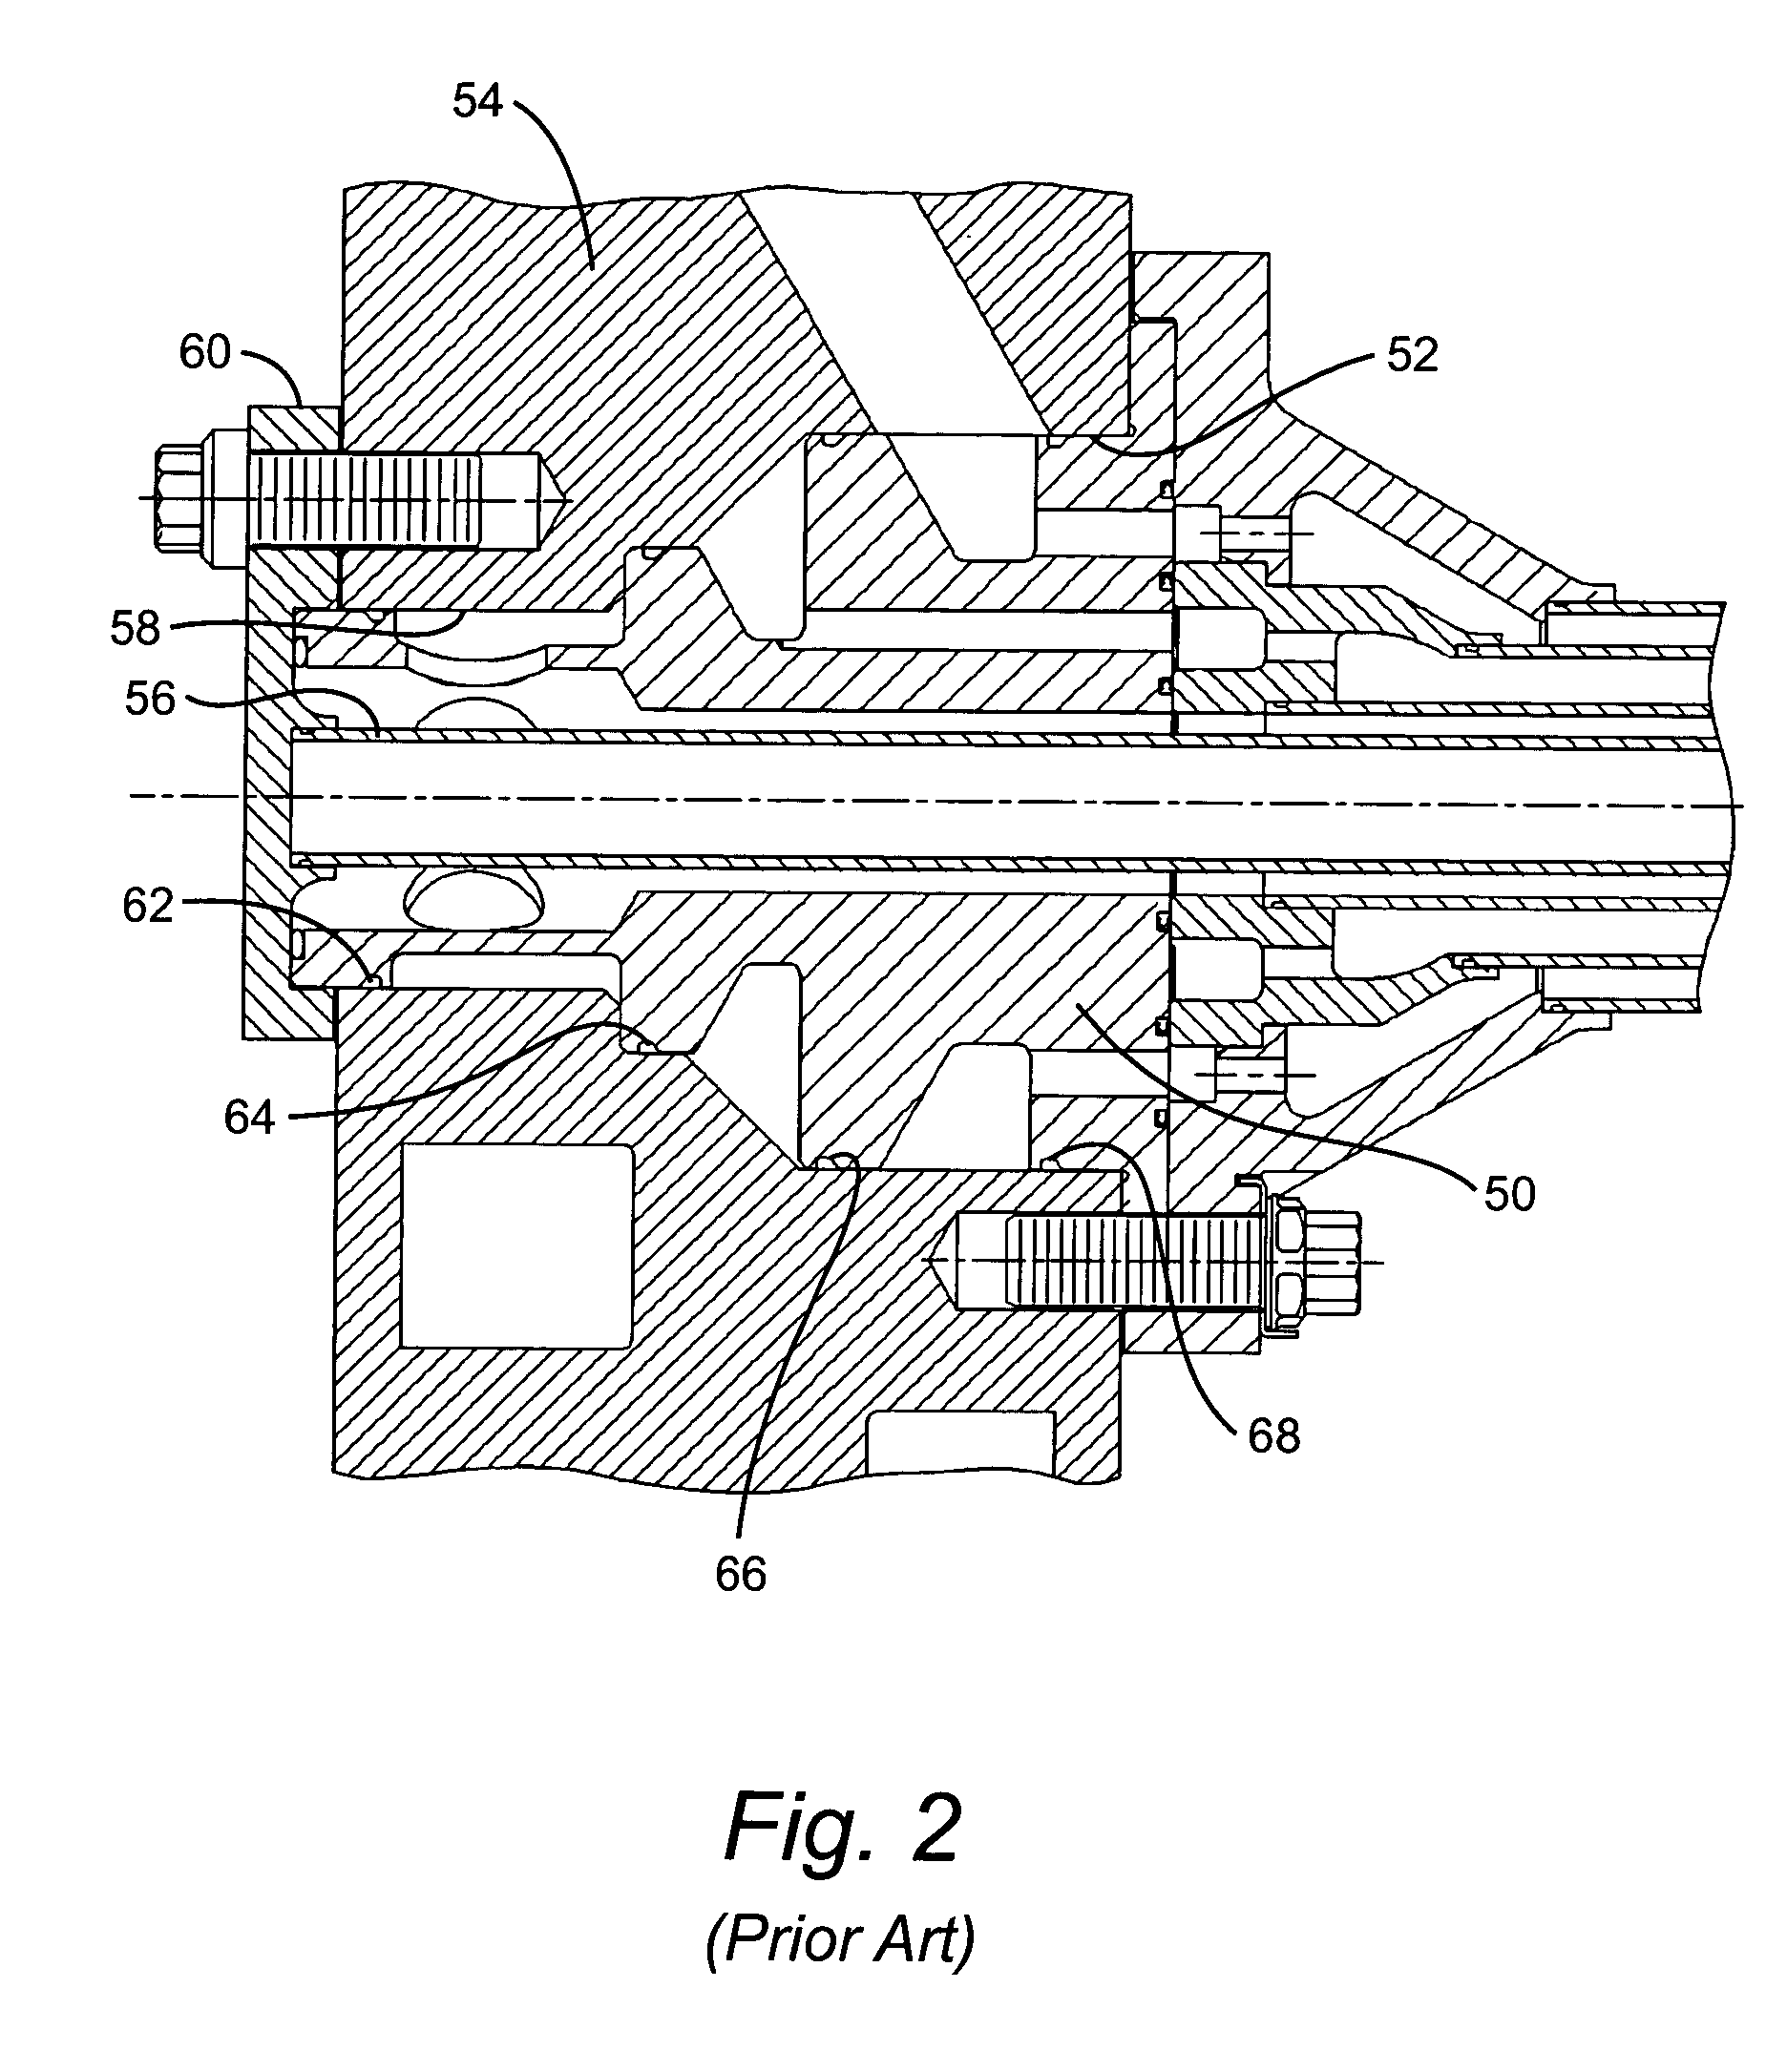 Turbine combustor endcover assembly